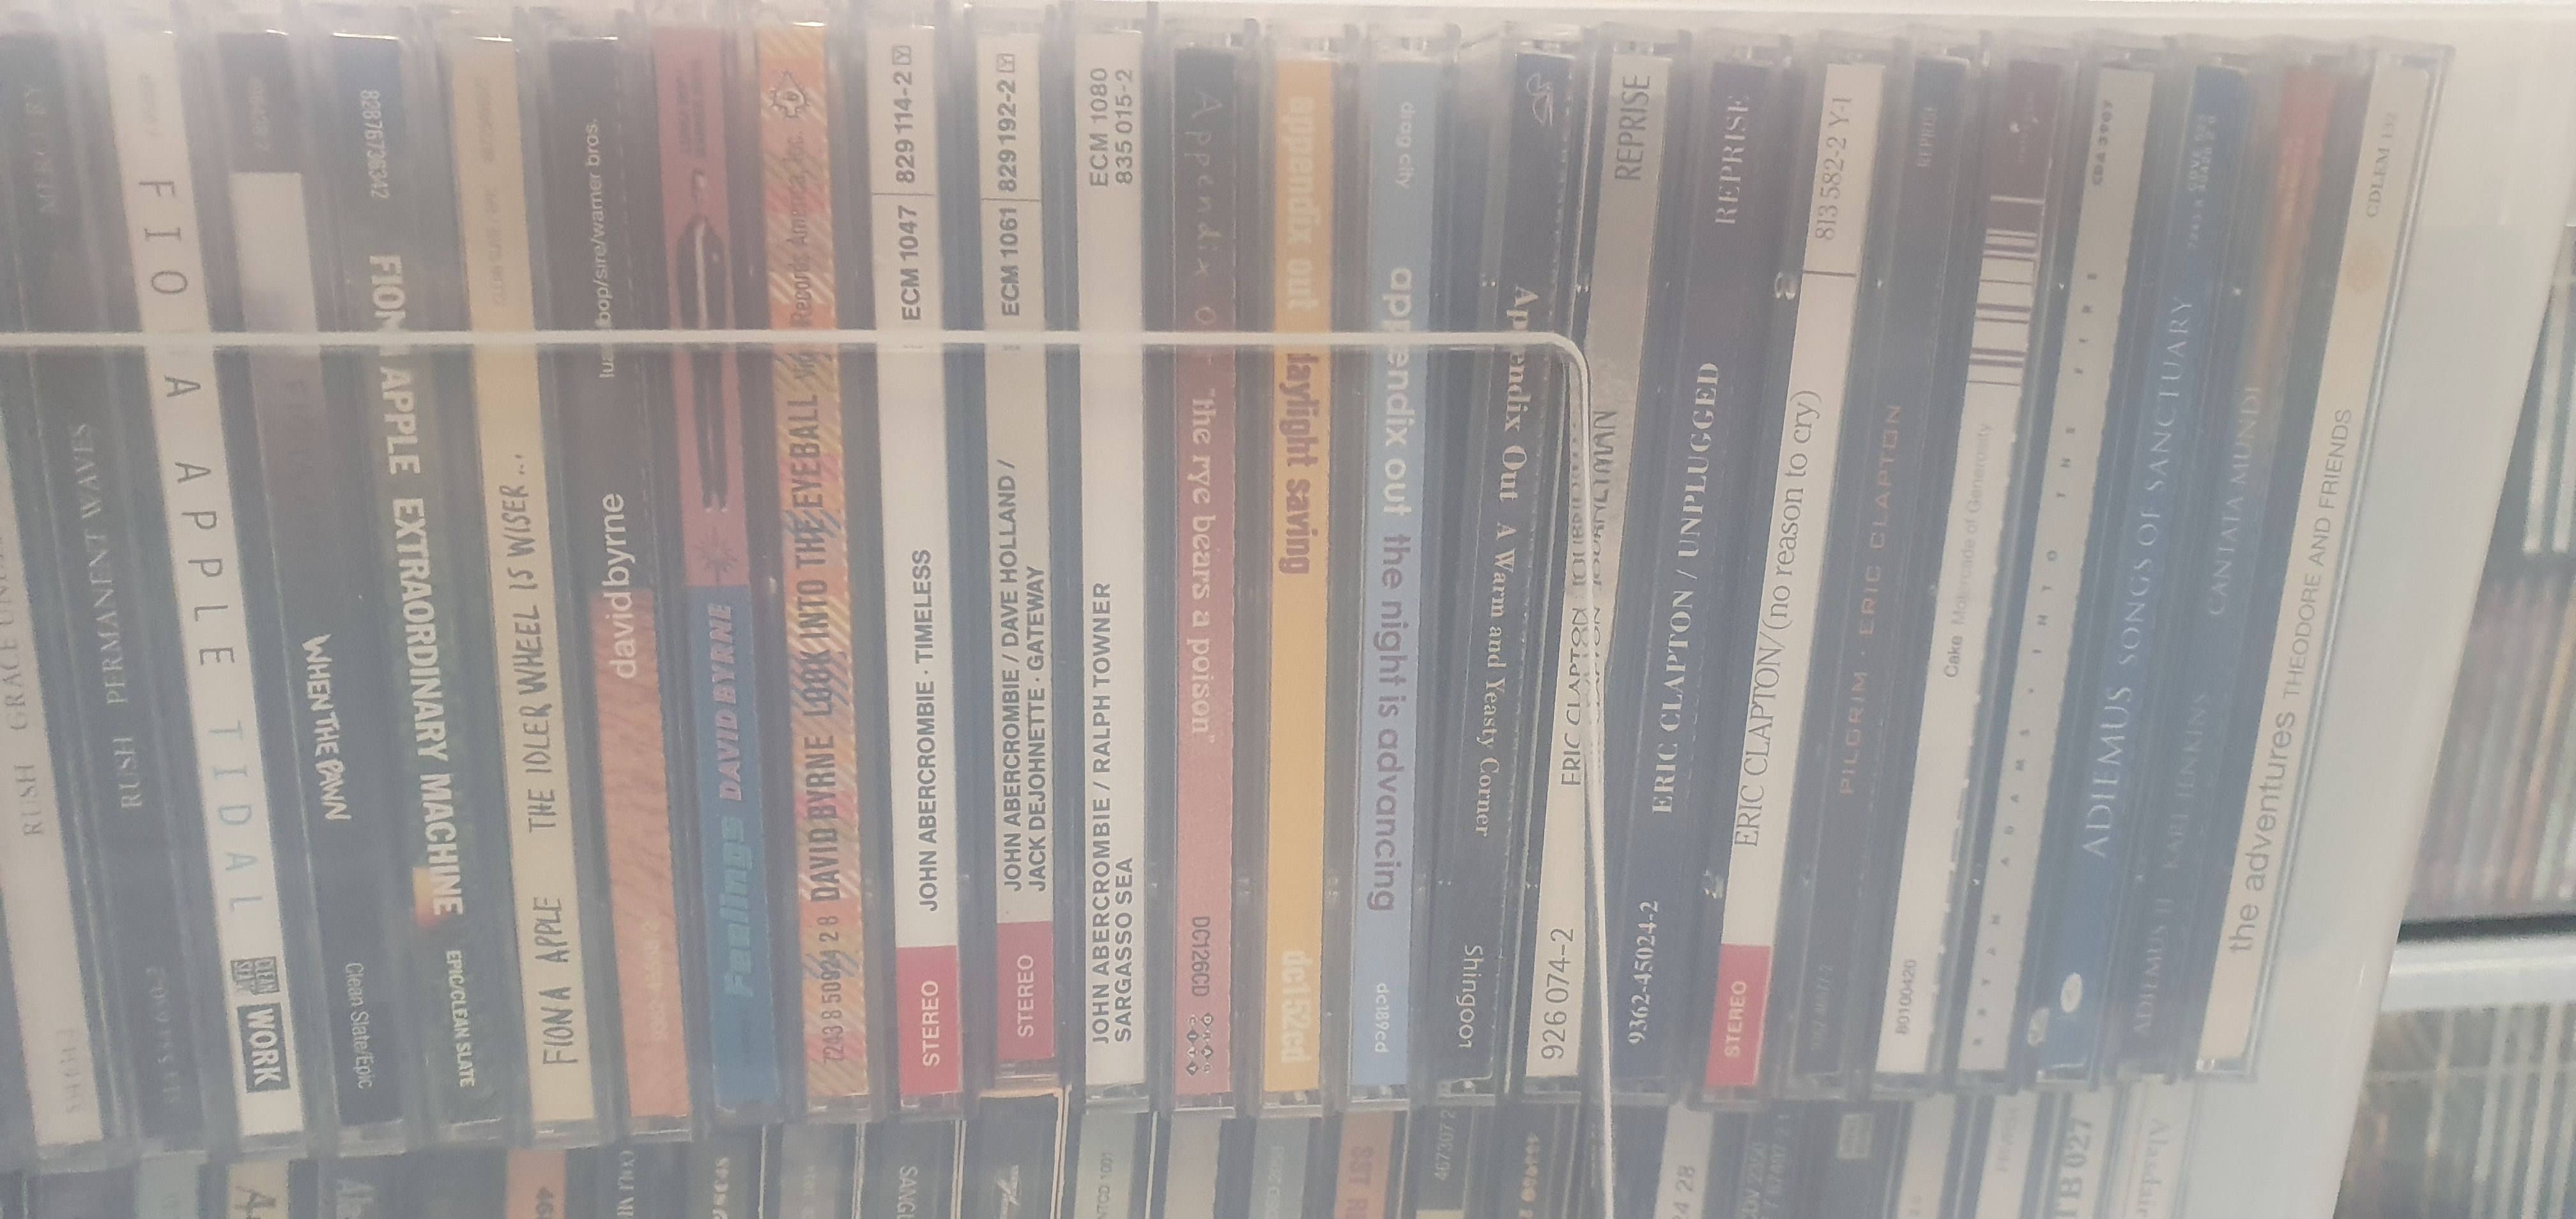 LARGE COLLECTION OF APPROXIMATELY 200 MUSIC CD'S - Image 3 of 9